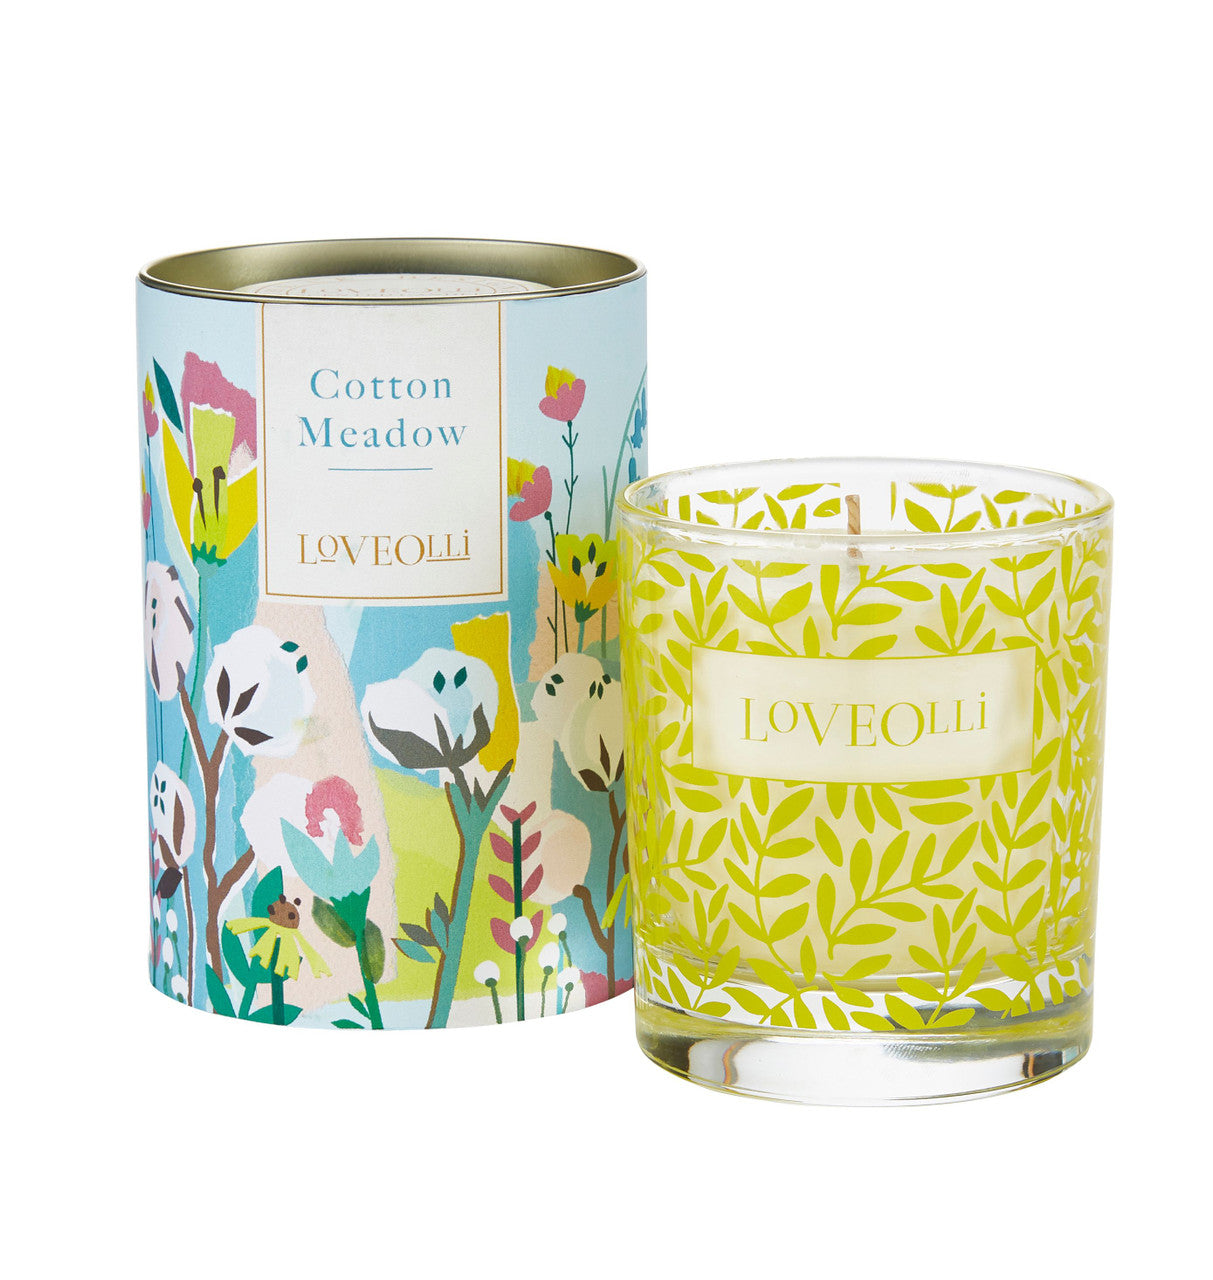 Love Olli Cotton Meadow scented candle in glass. Hand poured in the UK.